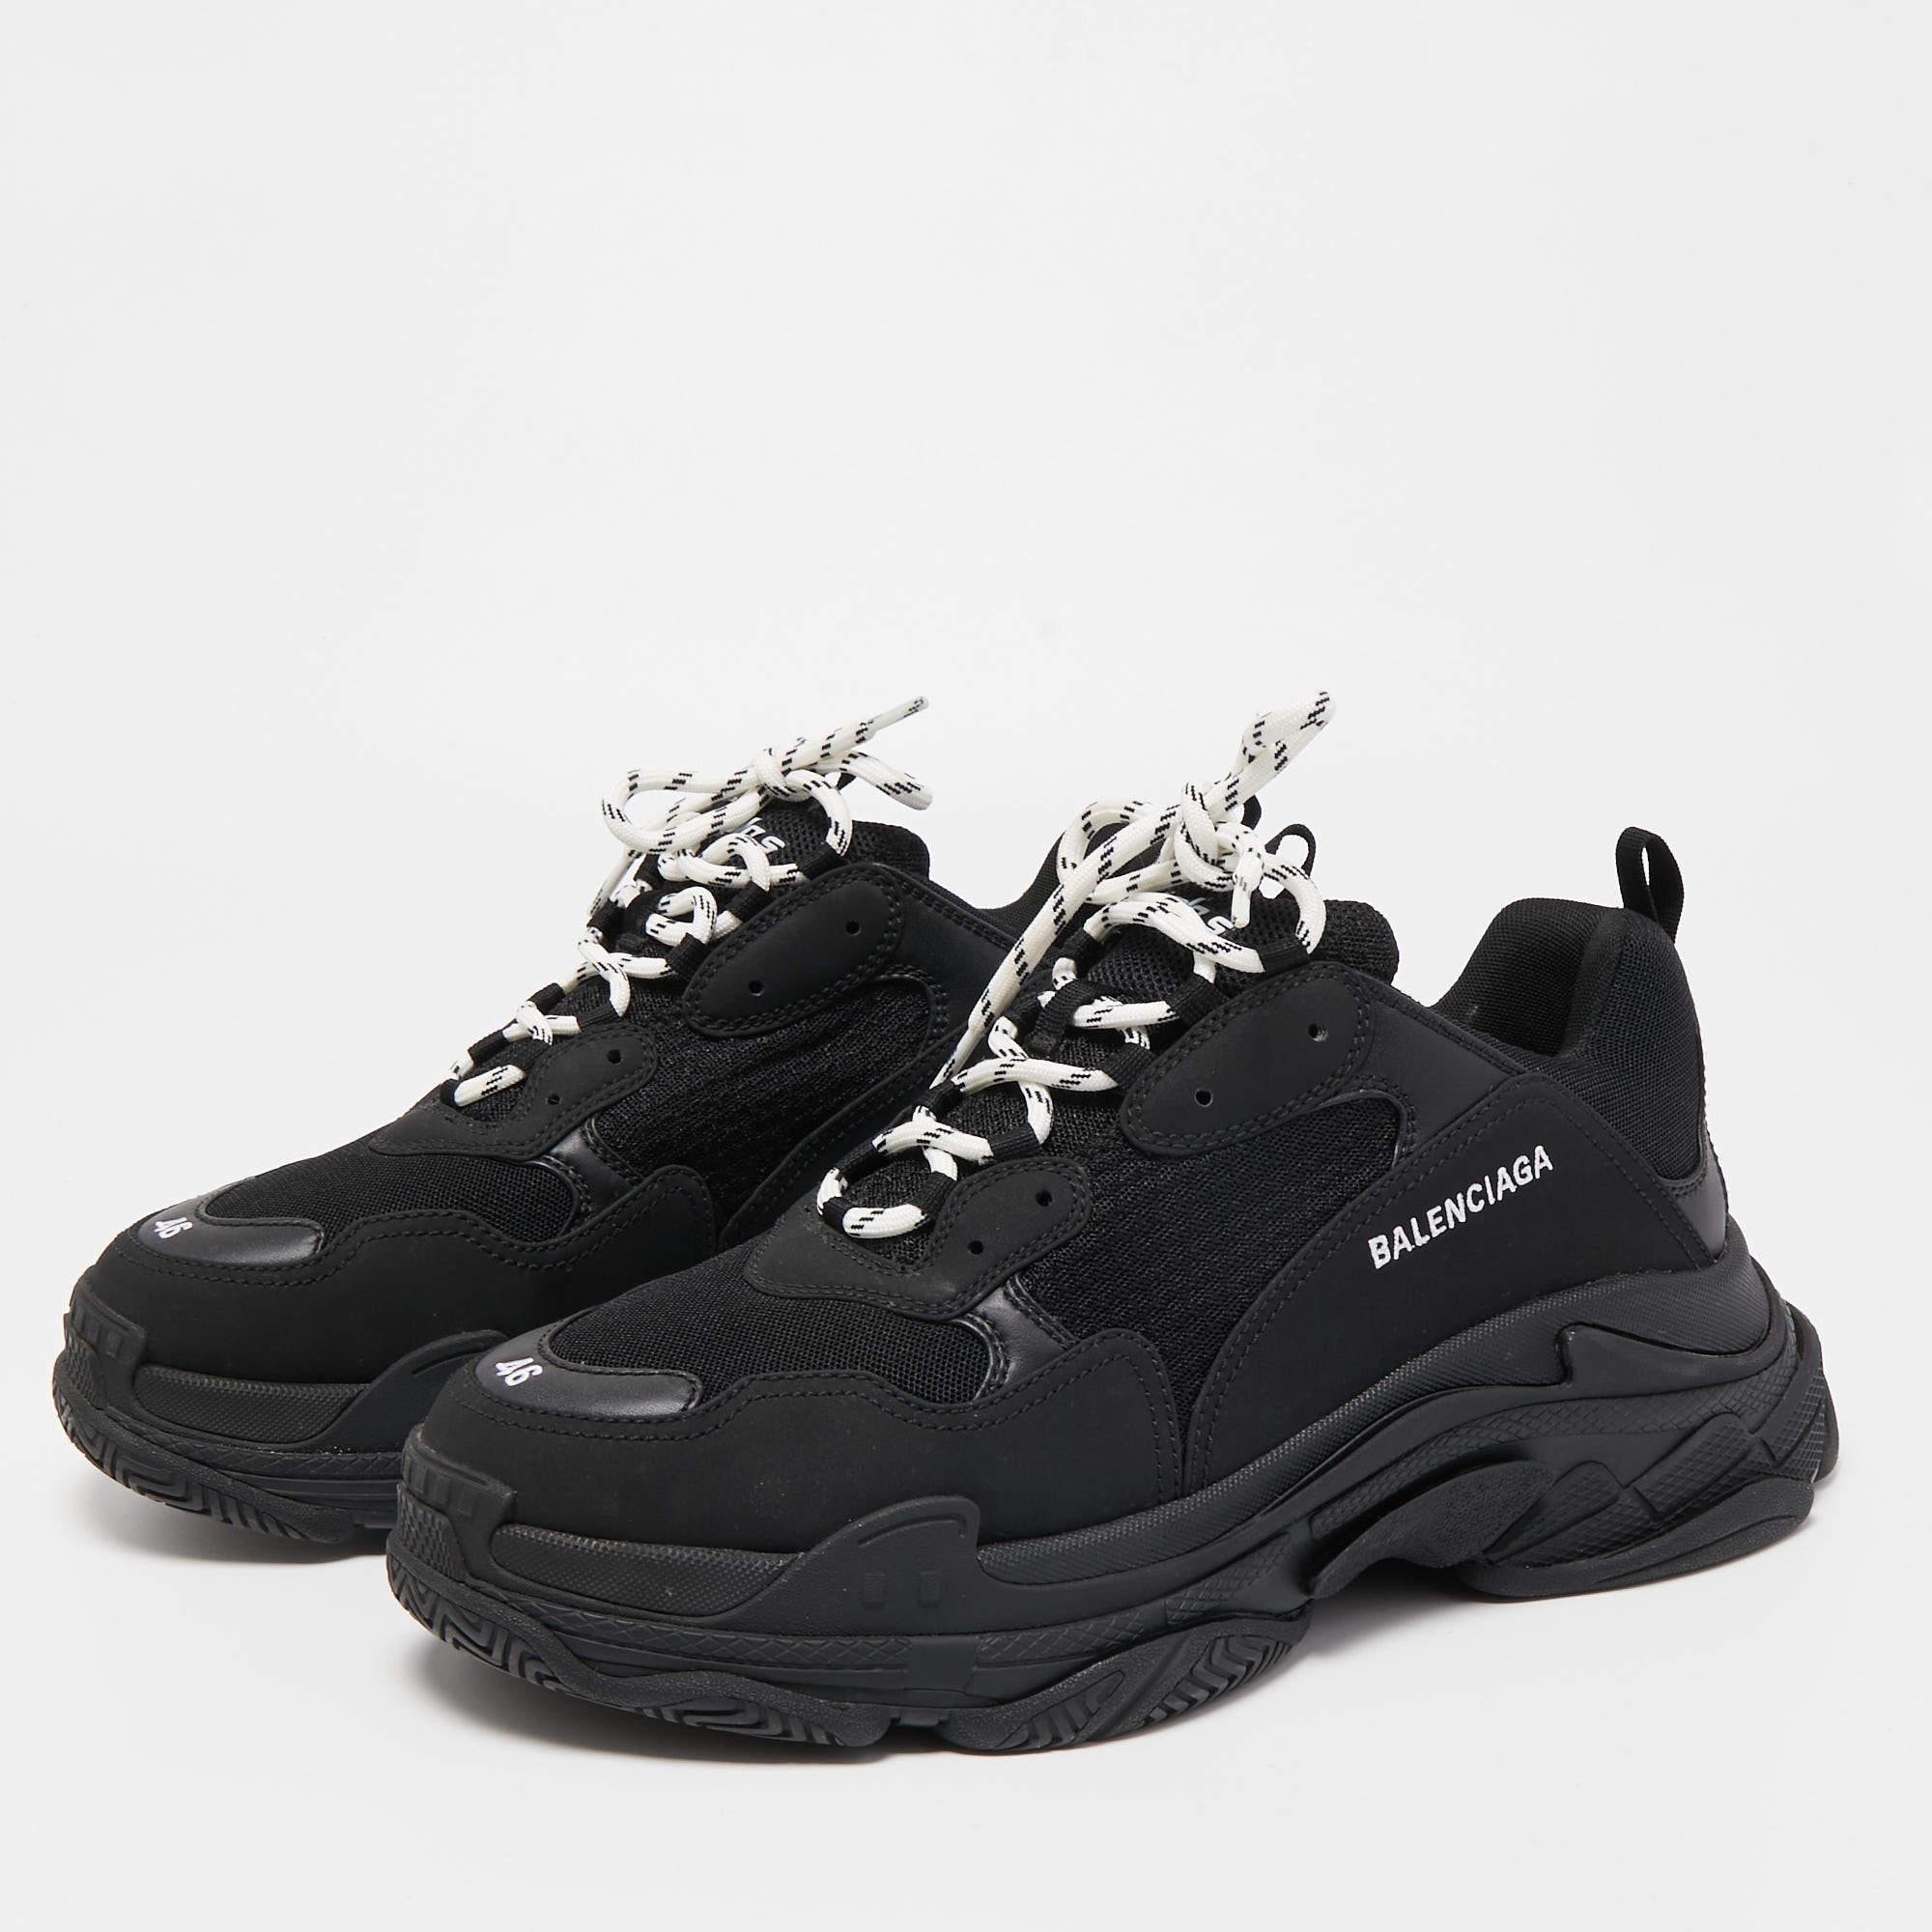 Balenciaga Black Mesh and Leather Triple S Sneakers Size 46 3